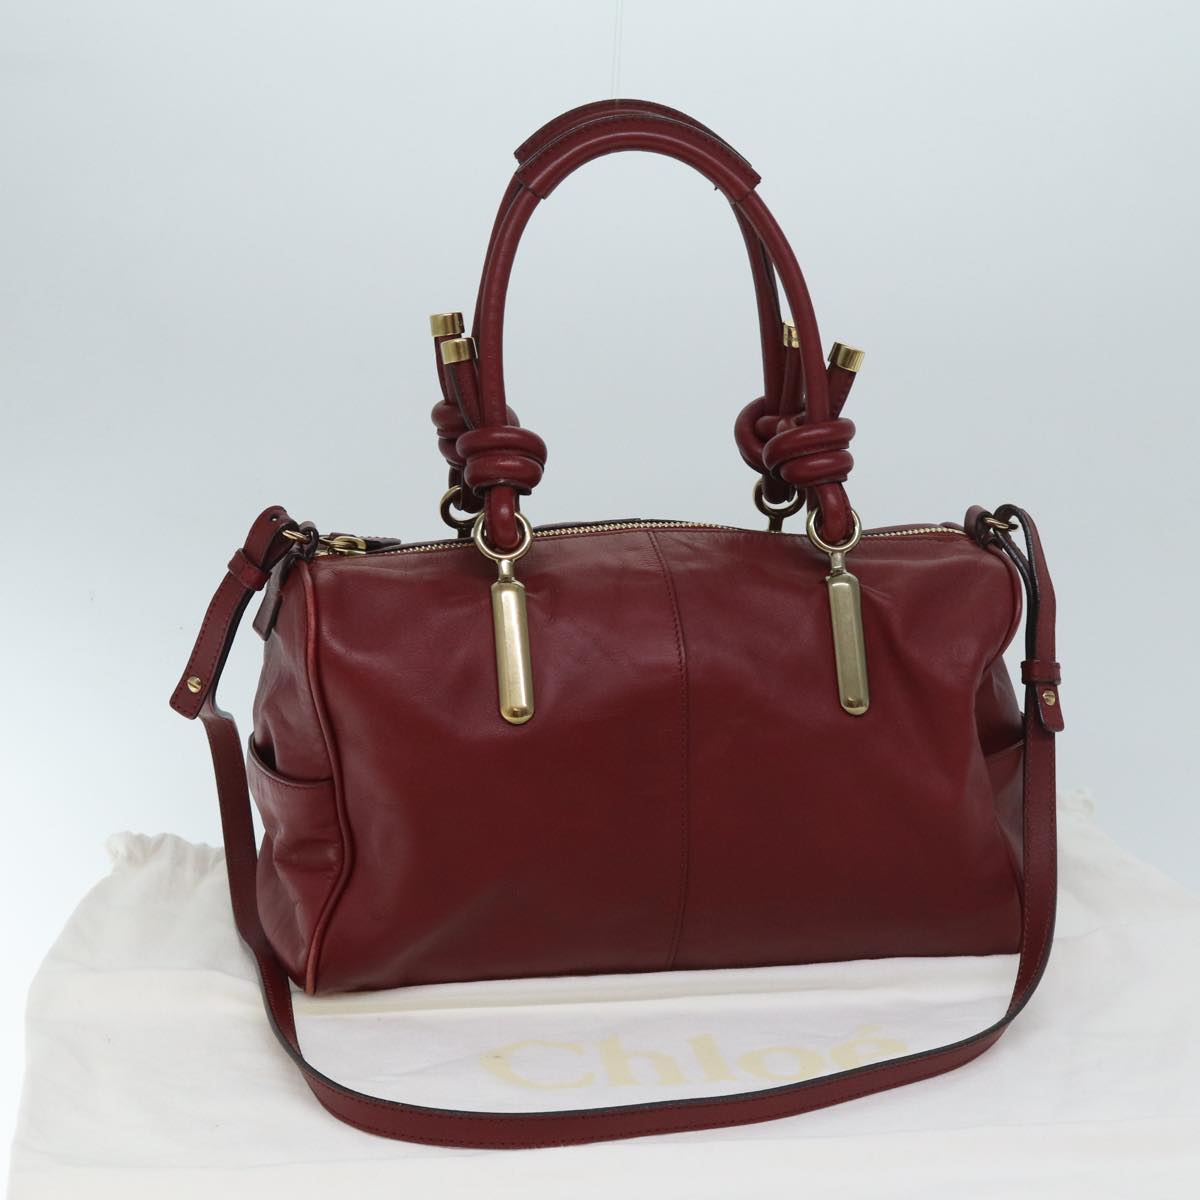 Chloe Hand Bag Leather 2way Red Auth yk11417